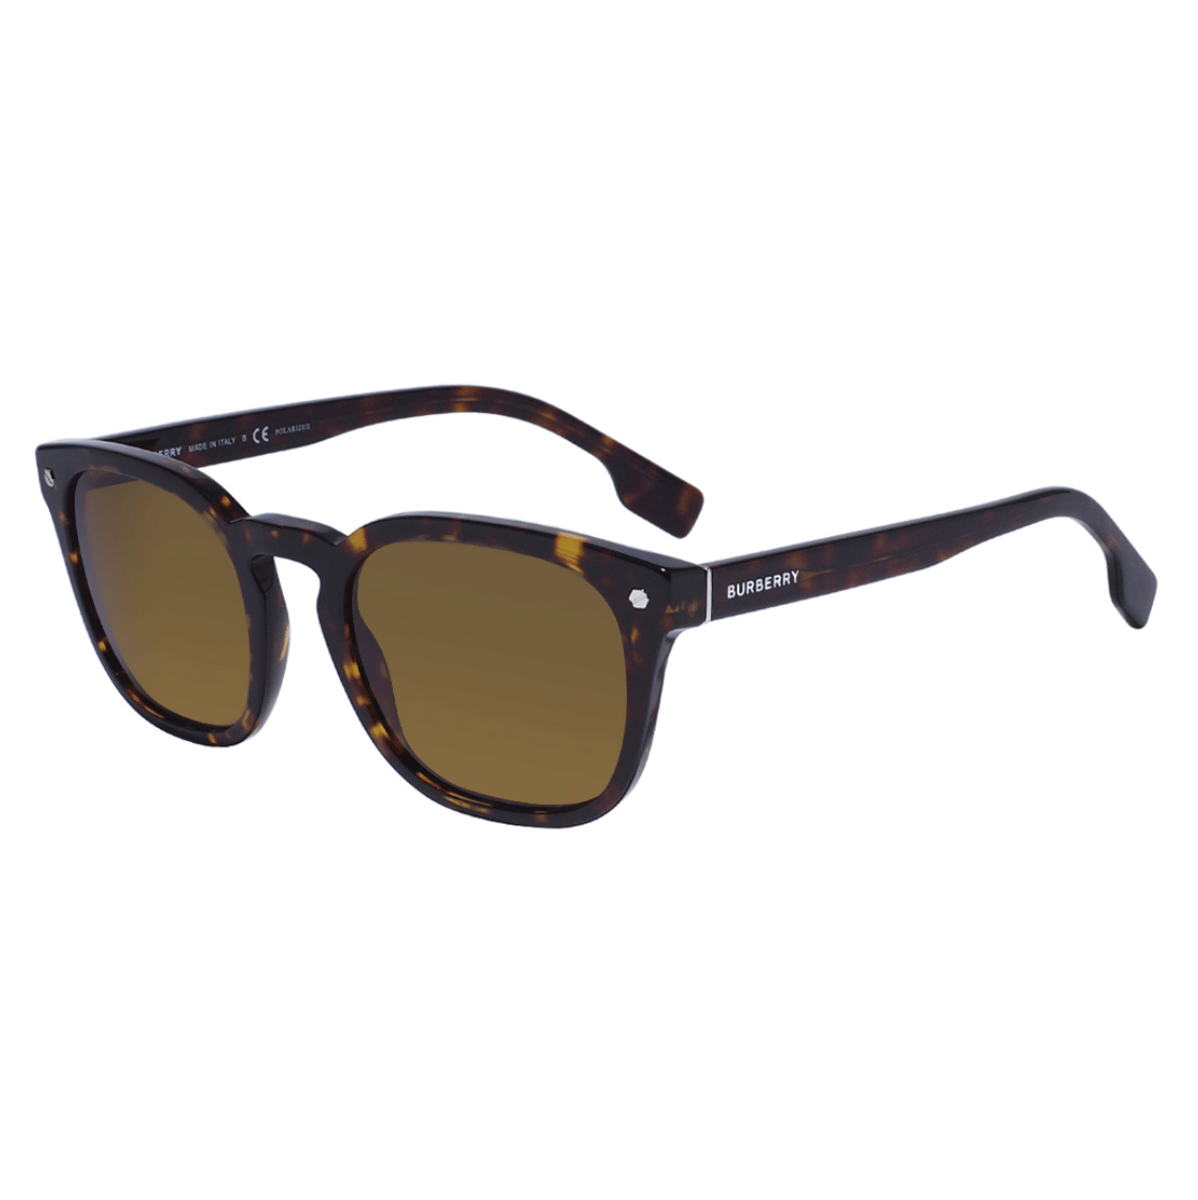 "Shop for stylish Burberry BE4329F sunglasses at Optorium: Square metal frames with a 55-22-145 size, ideal for staying cool and fashionable in any setting."